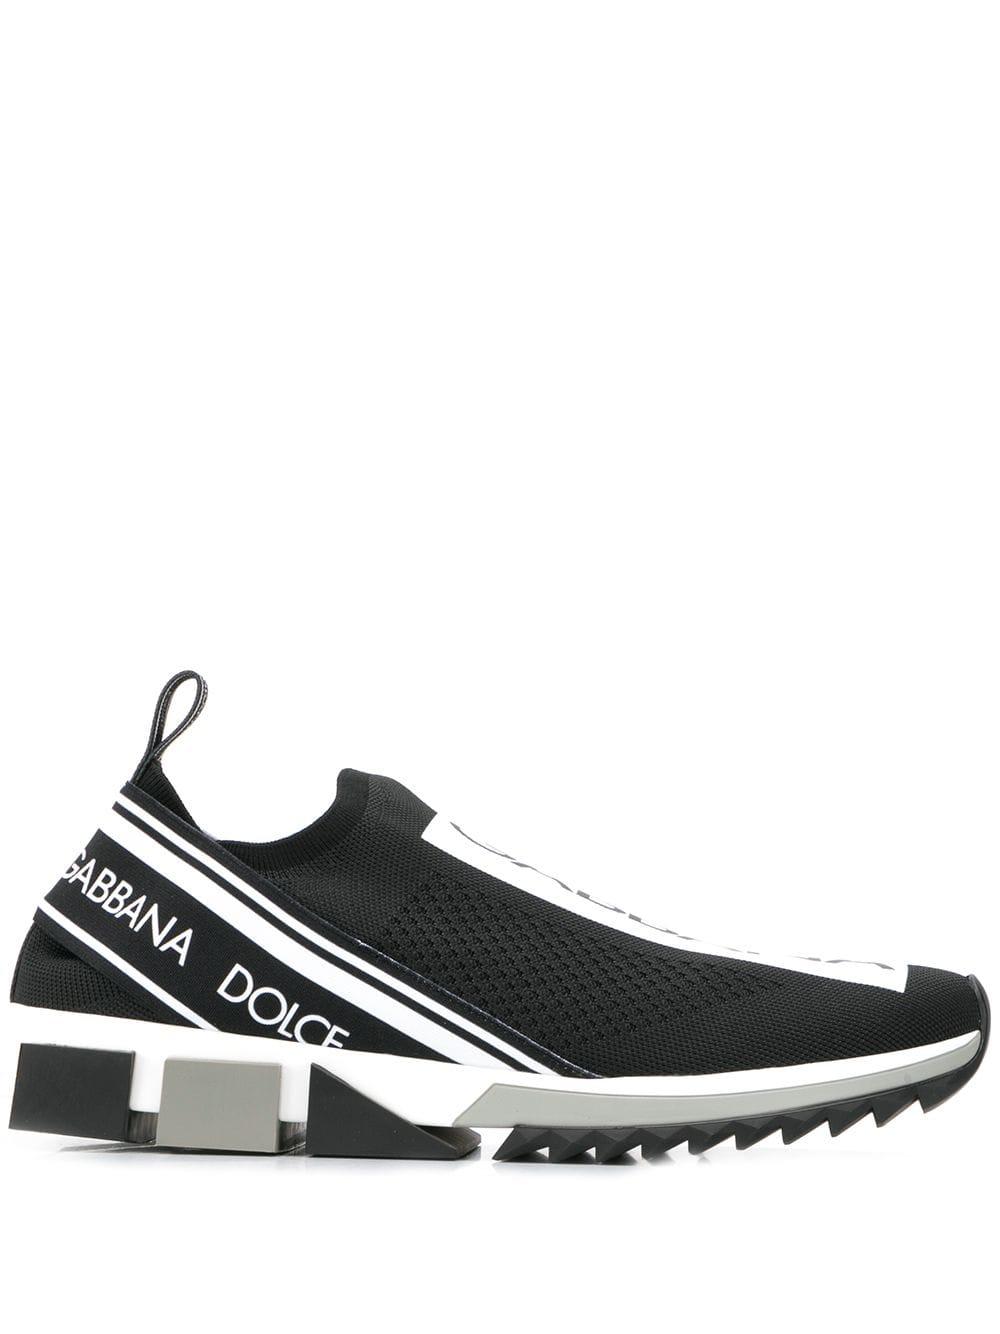 Dolce & Gabbana Logo Printed Sneakers in Black (White) for Men - Save 52% -  Lyst